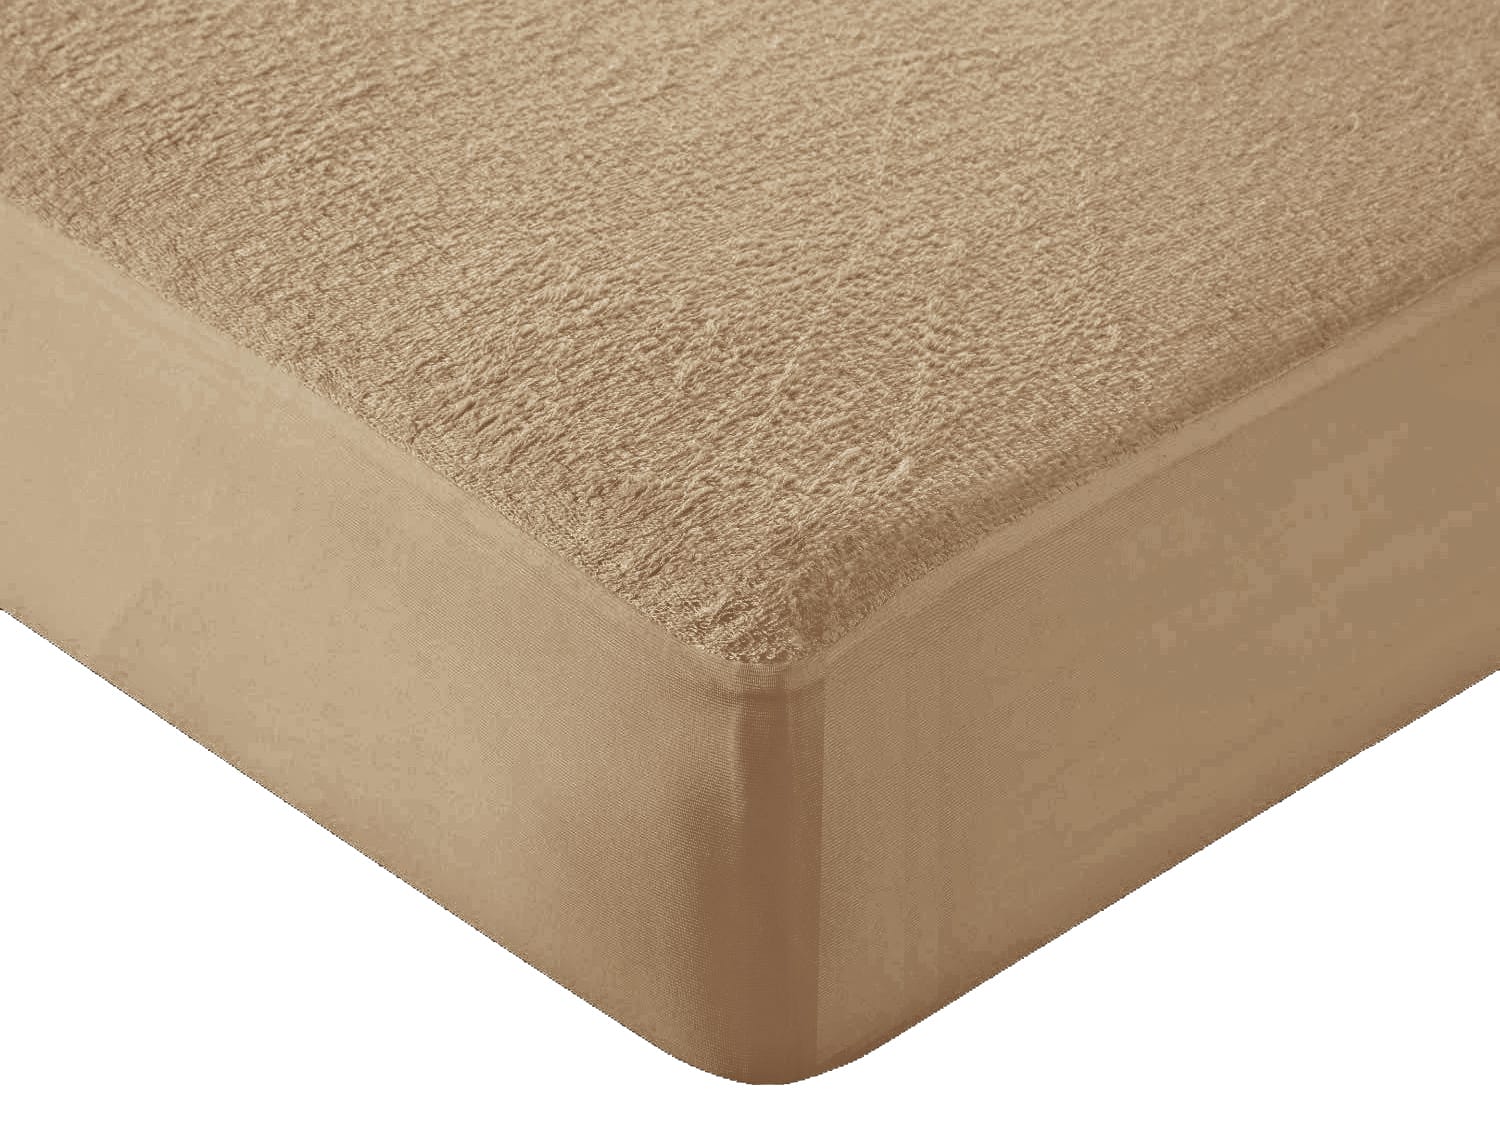 Camel Brown Water Proof Terry Mattress Protector online at best prices